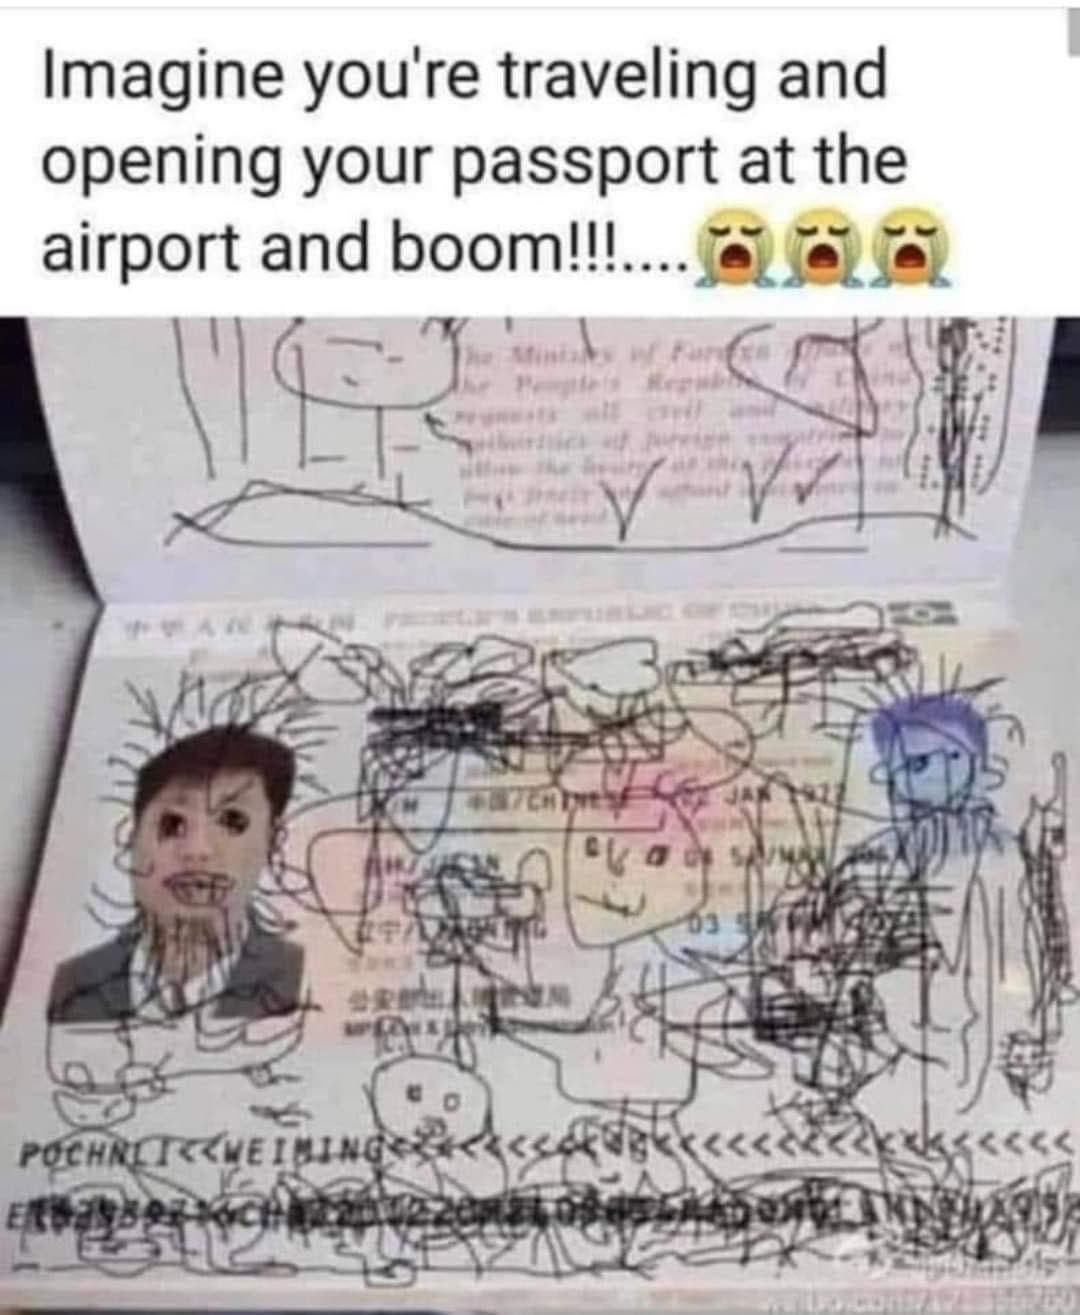 Imagine you're traveling and opening your passport at the airport and boom!!!